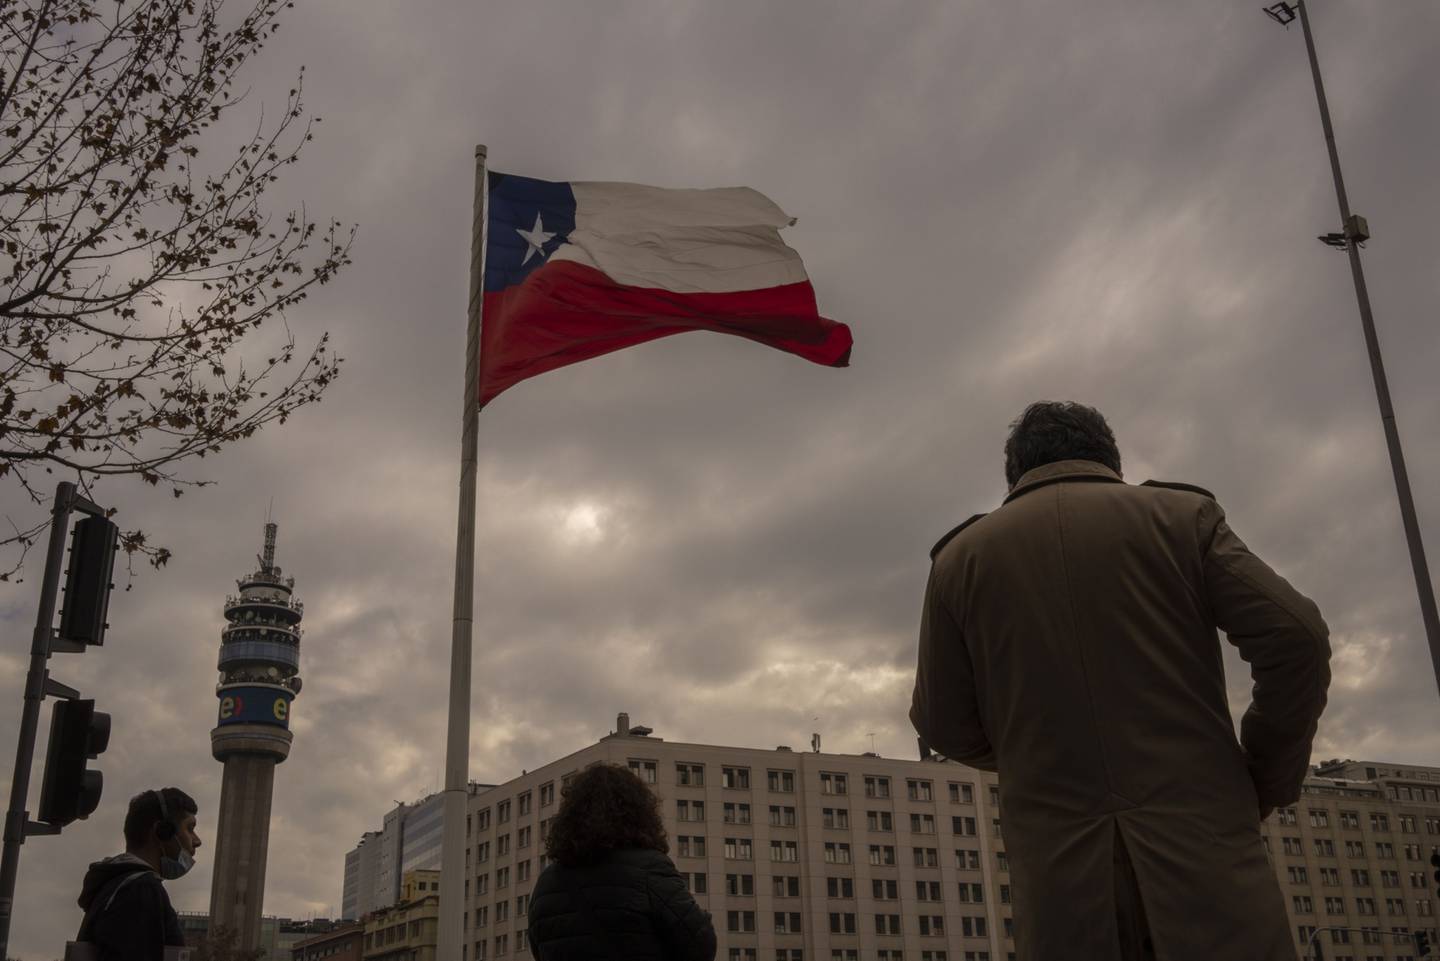 A Chilean flag flies outside La Moneda Palace in Santiago, Chile, on Wednesday, July 13, 2022. Photographer: Tamara Merino/Bloomberg